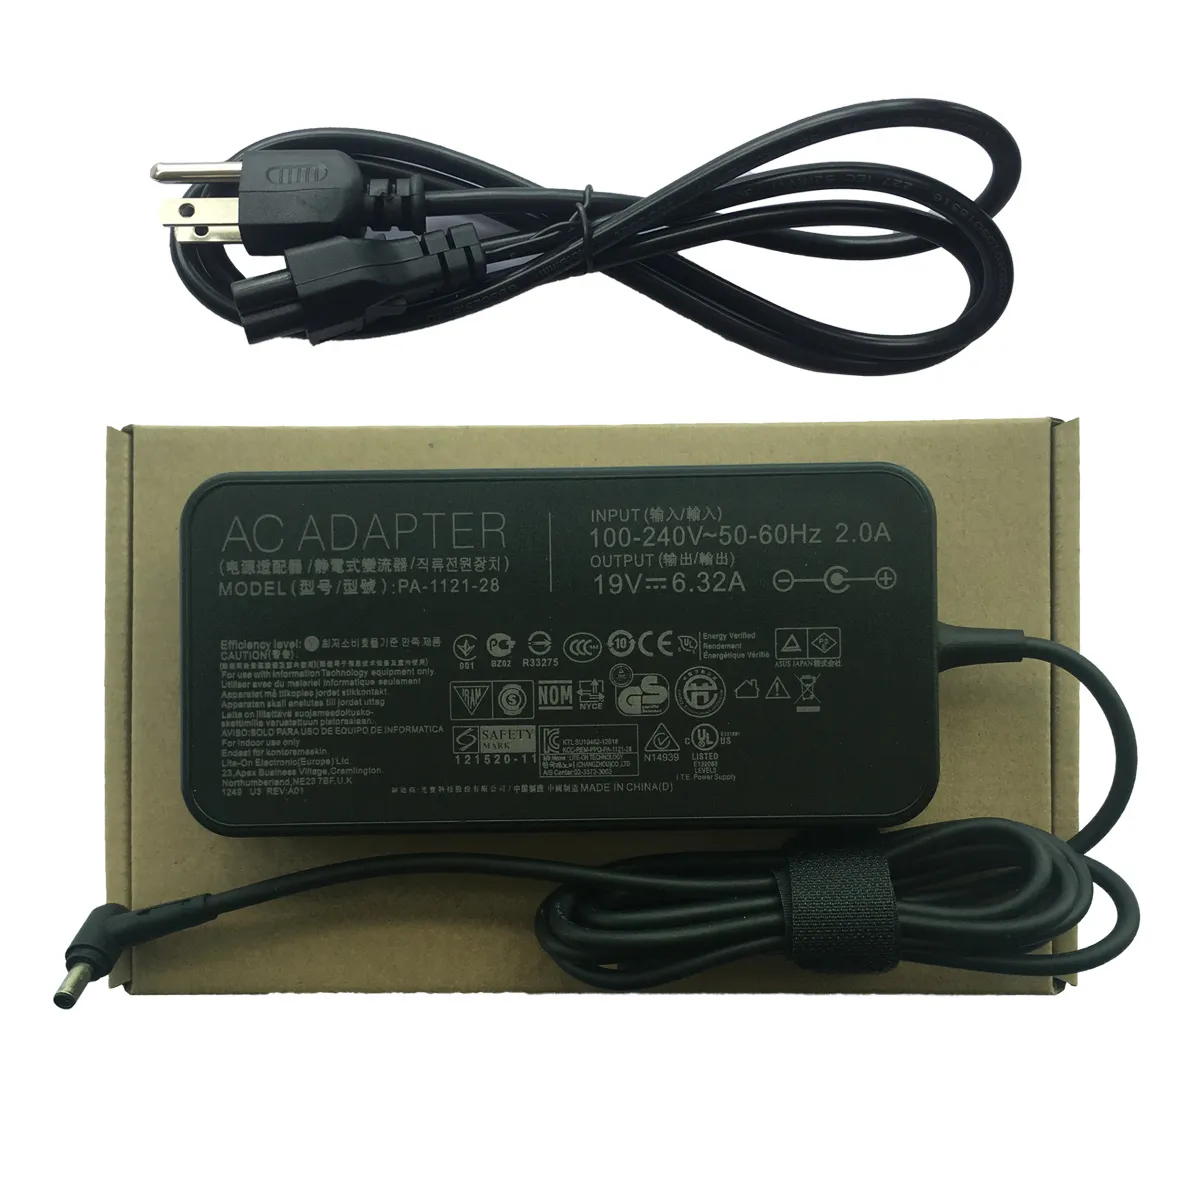 Genuine Slim 19V 6.32A 120W AC Adapter Laptop Charger for ASUS ZenBook Pro ROG G501JW UX501J G501VW R501JW PU500CA Games power